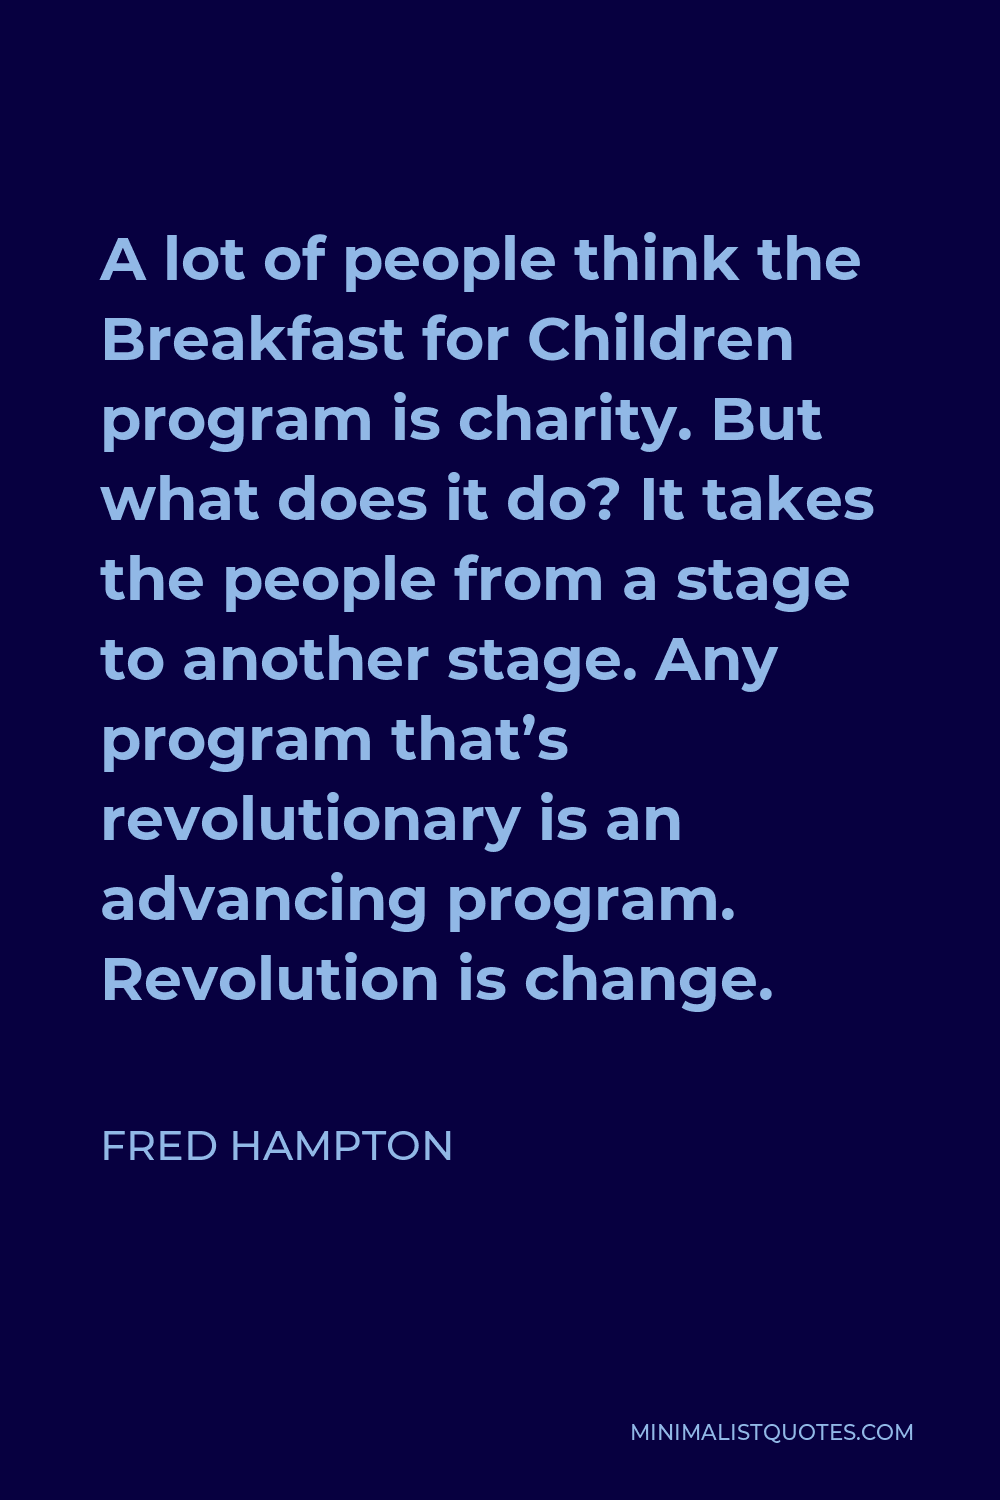 Fred Hampton Quote - A lot of people think the Breakfast for Children program is charity. But what does it do? It takes the people from a stage to another stage. Any program that’s revolutionary is an advancing program. Revolution is change.